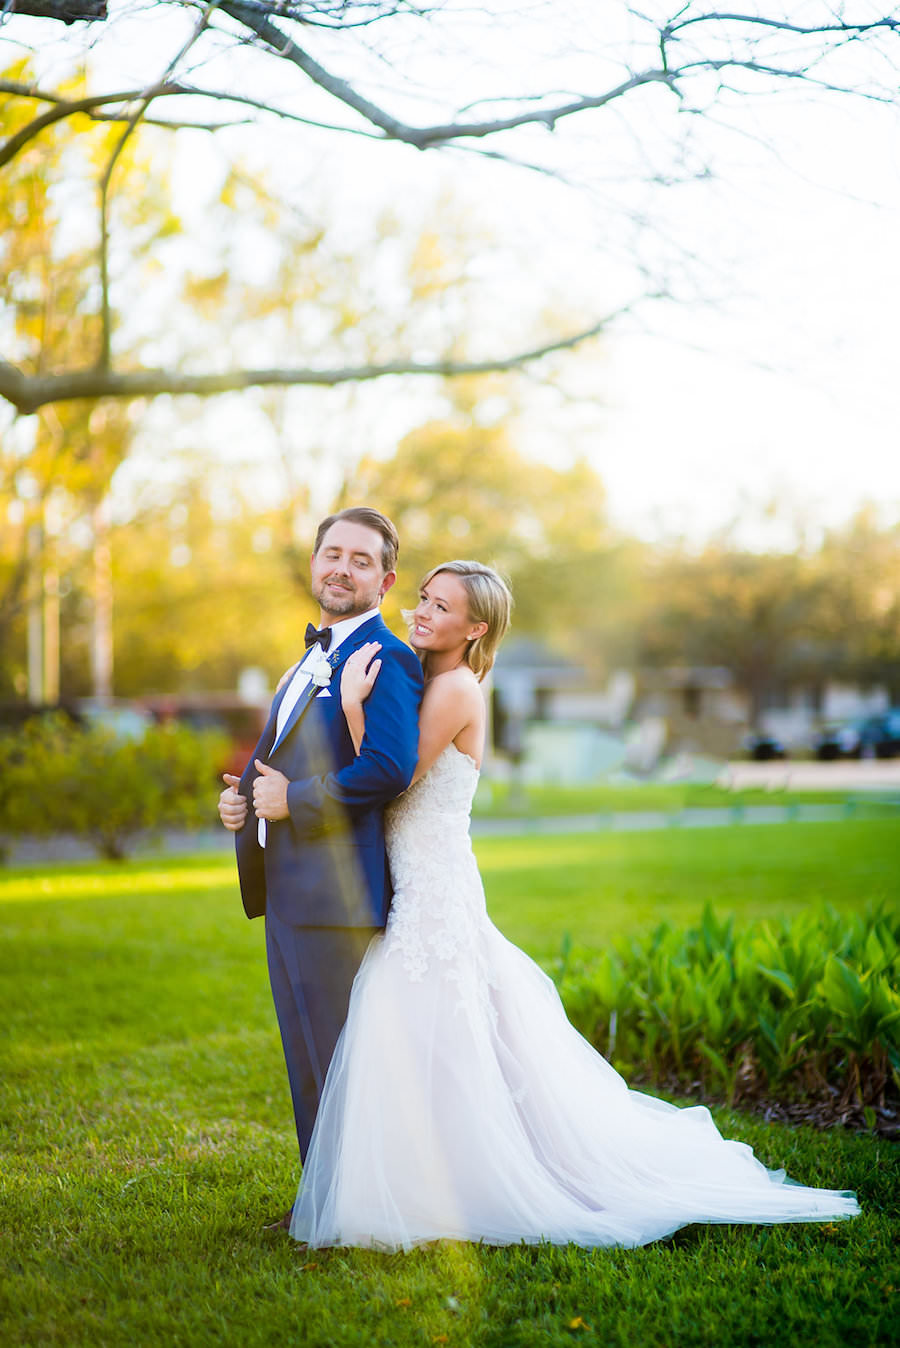 Bride and Groom Wedding Day Portrait in Ivory Lace Alvina Valenta Wedding Dress with Tulle Skirt | Tampa Wedding Photographer Kera Photography